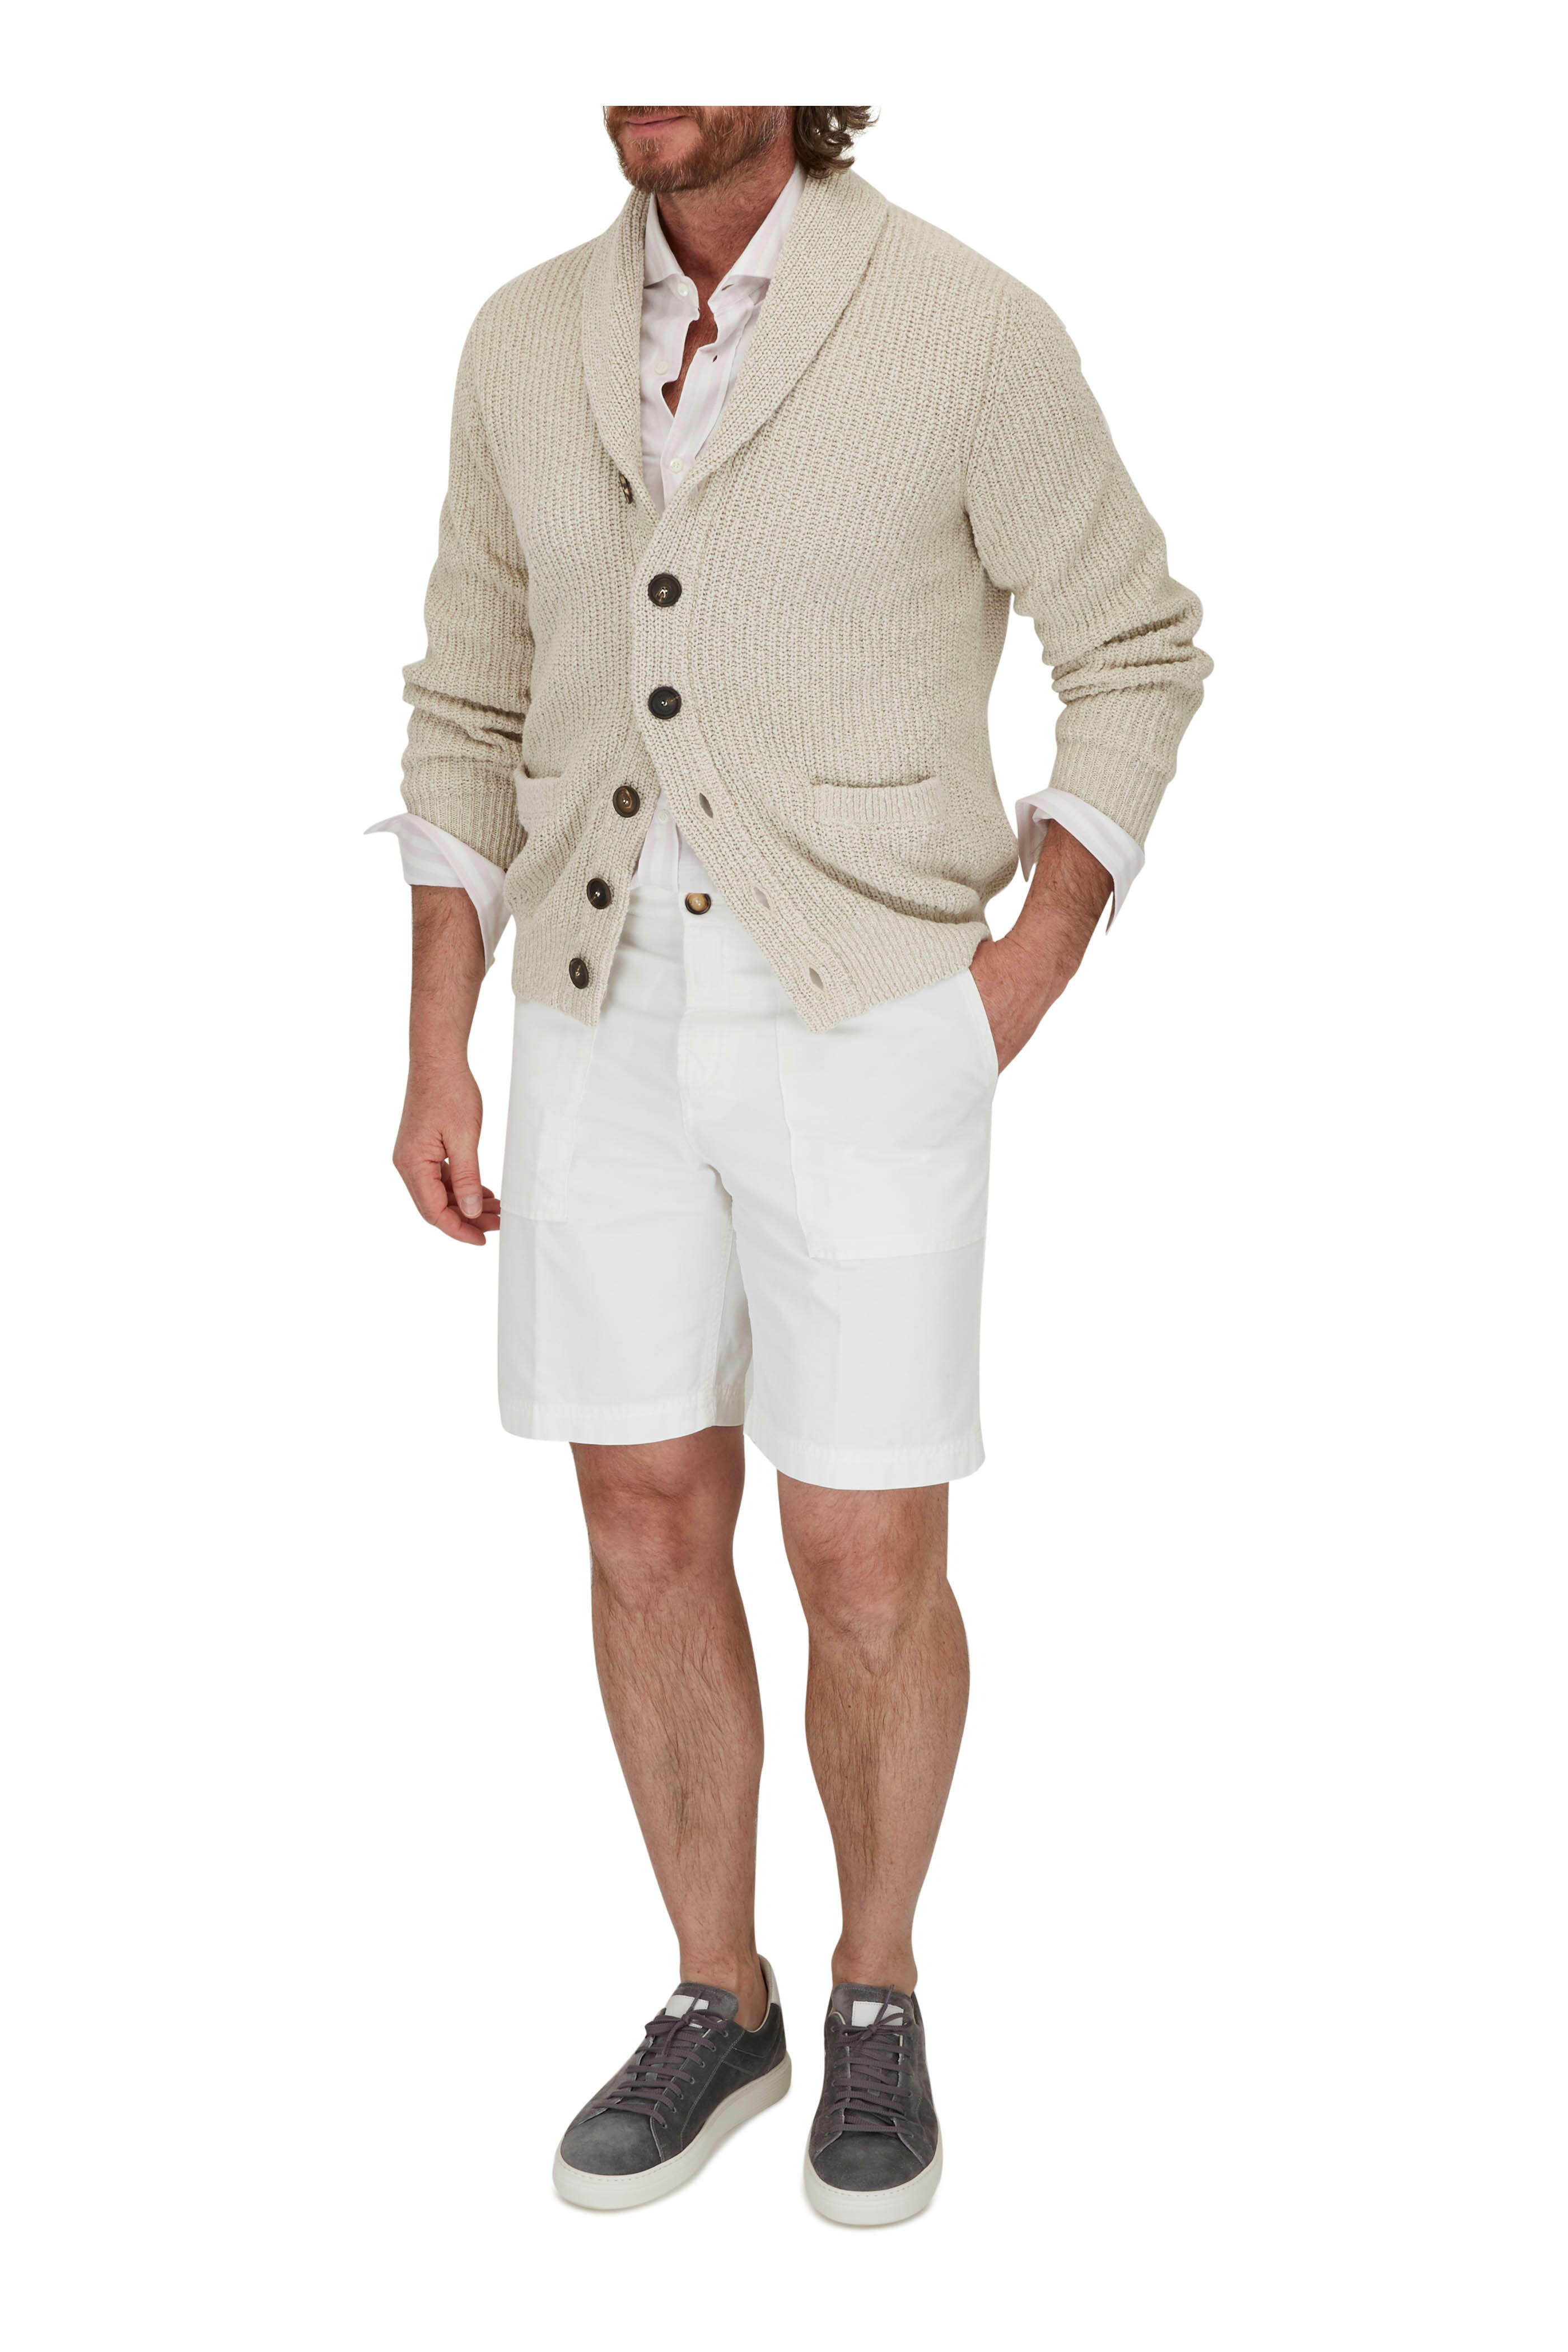 fordomme Great Barrier Reef Tante Brunello Cucinelli - Tan Cotton & Linen Shawl Collar Cardigan